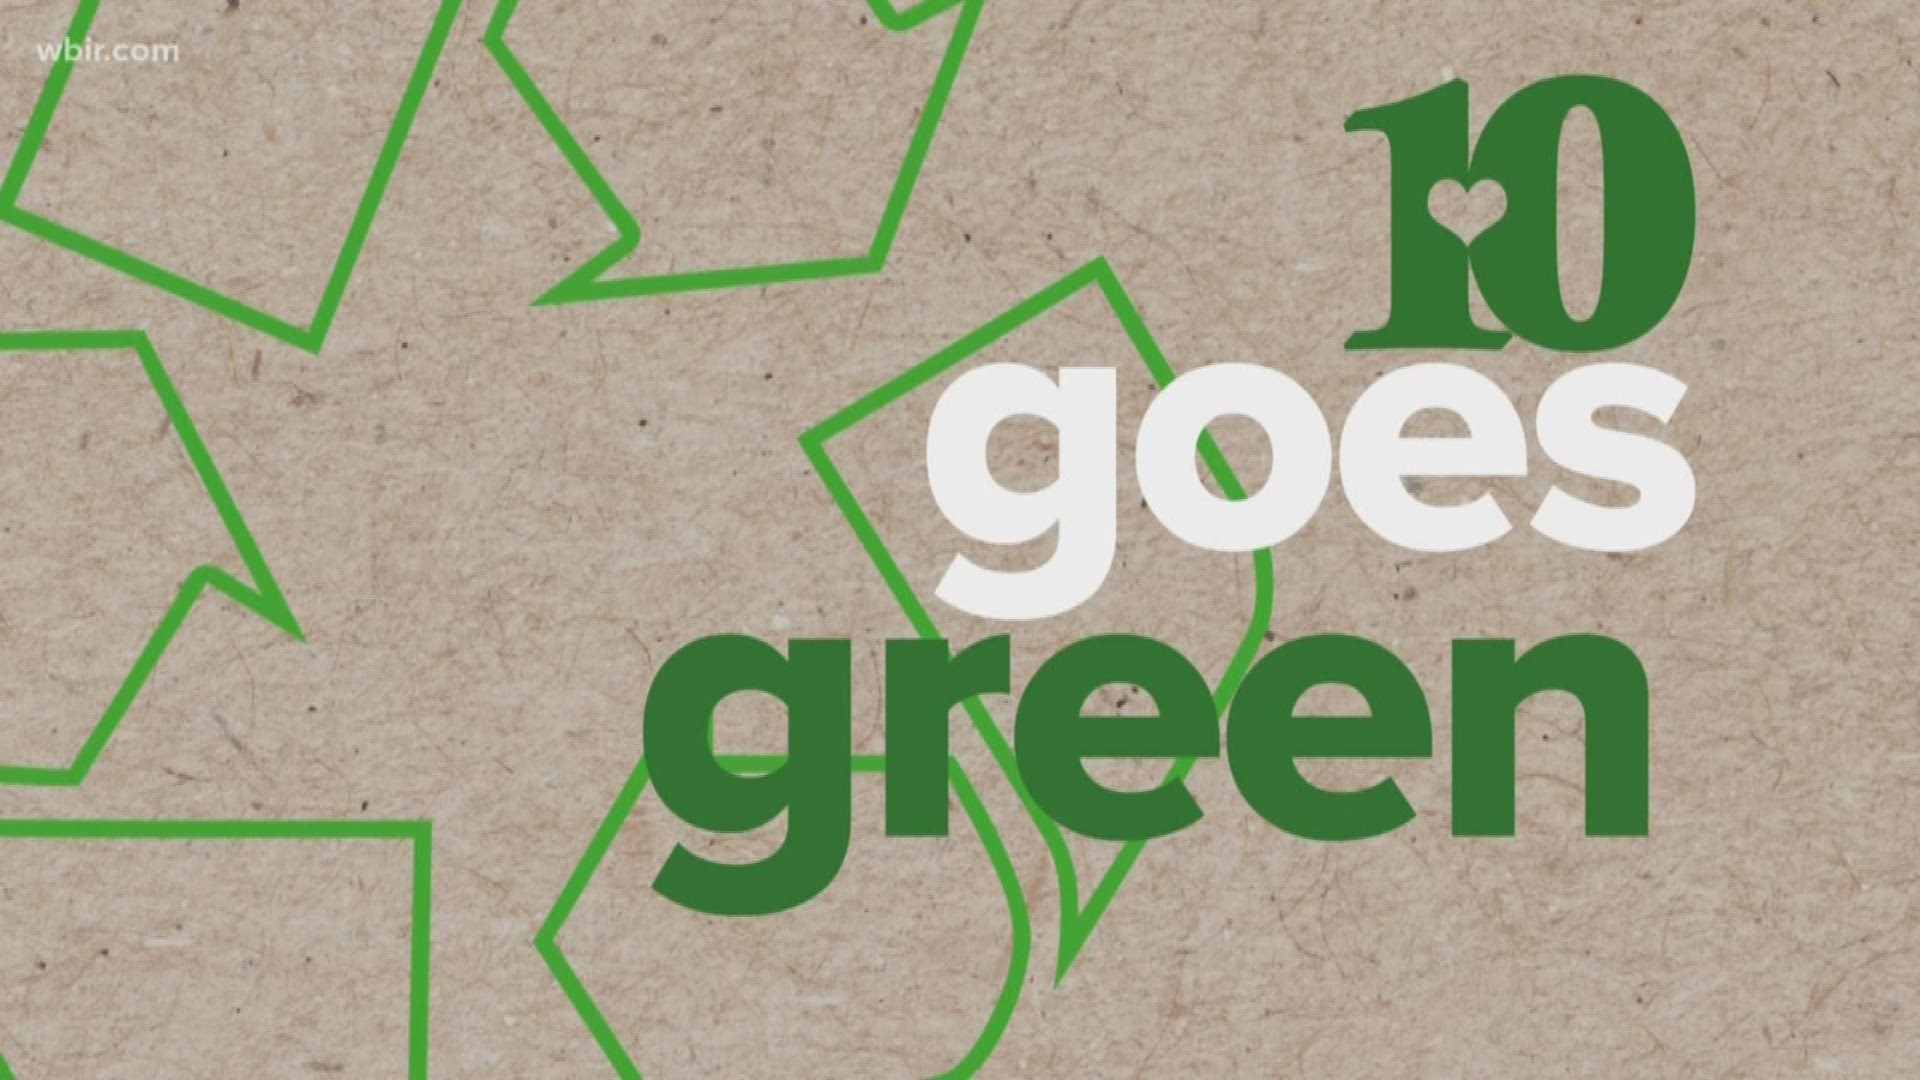 10News Reporter Katie Inman shows the ins and outs of recycling right here in Knoxville as we take a look at tips and tricks for recycling and decreasing your carbon footprint.